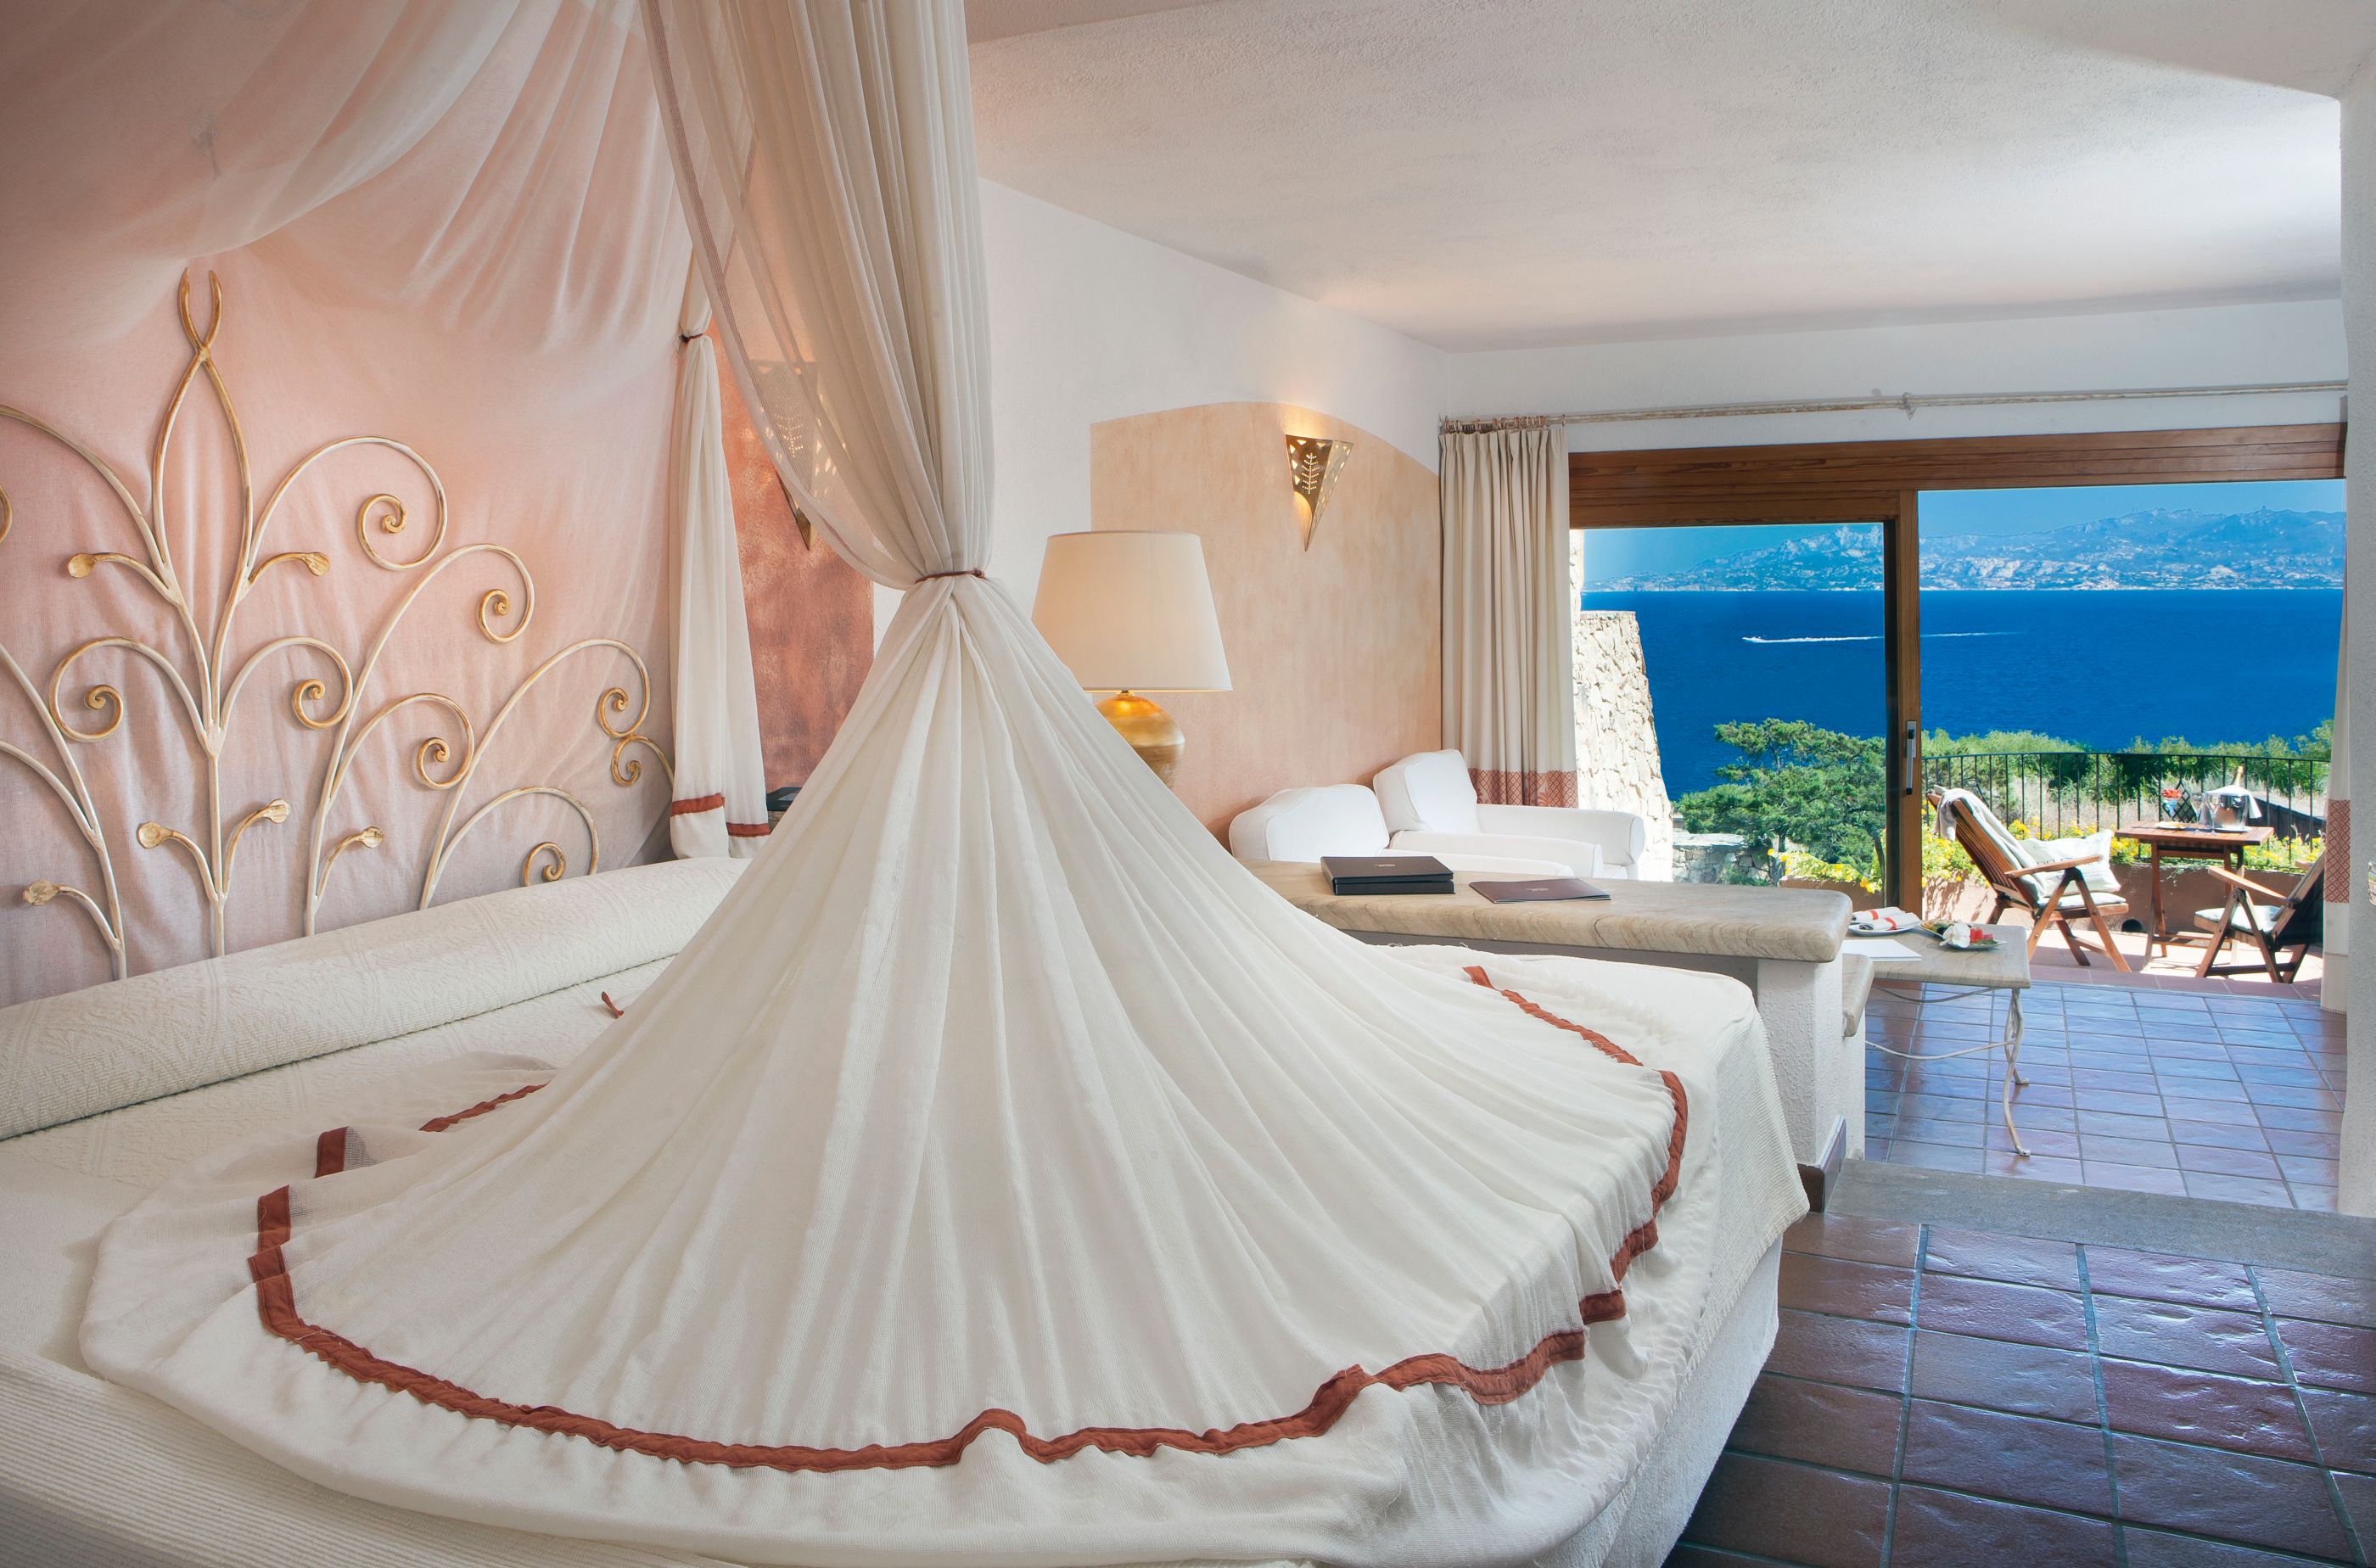 Executive suite of Capa d'Orso, Italy